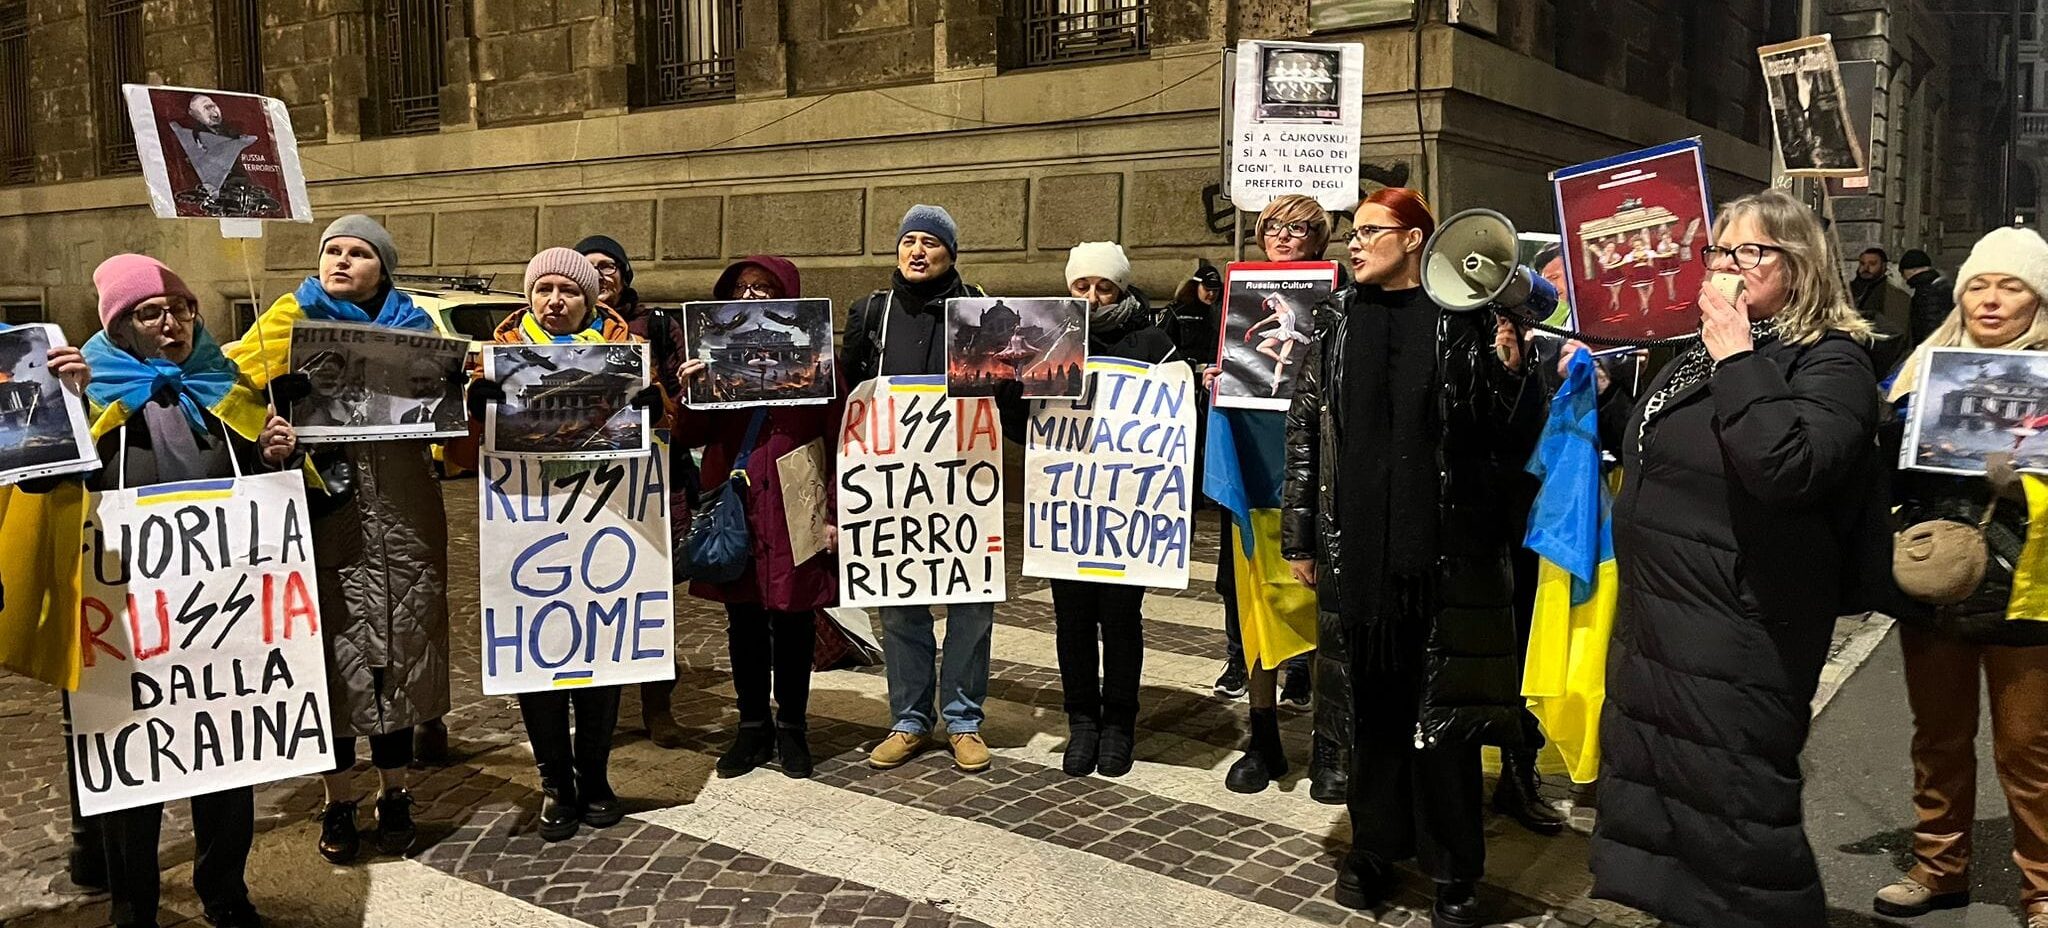 Ukrainians in Italy call to boycott Russian culture